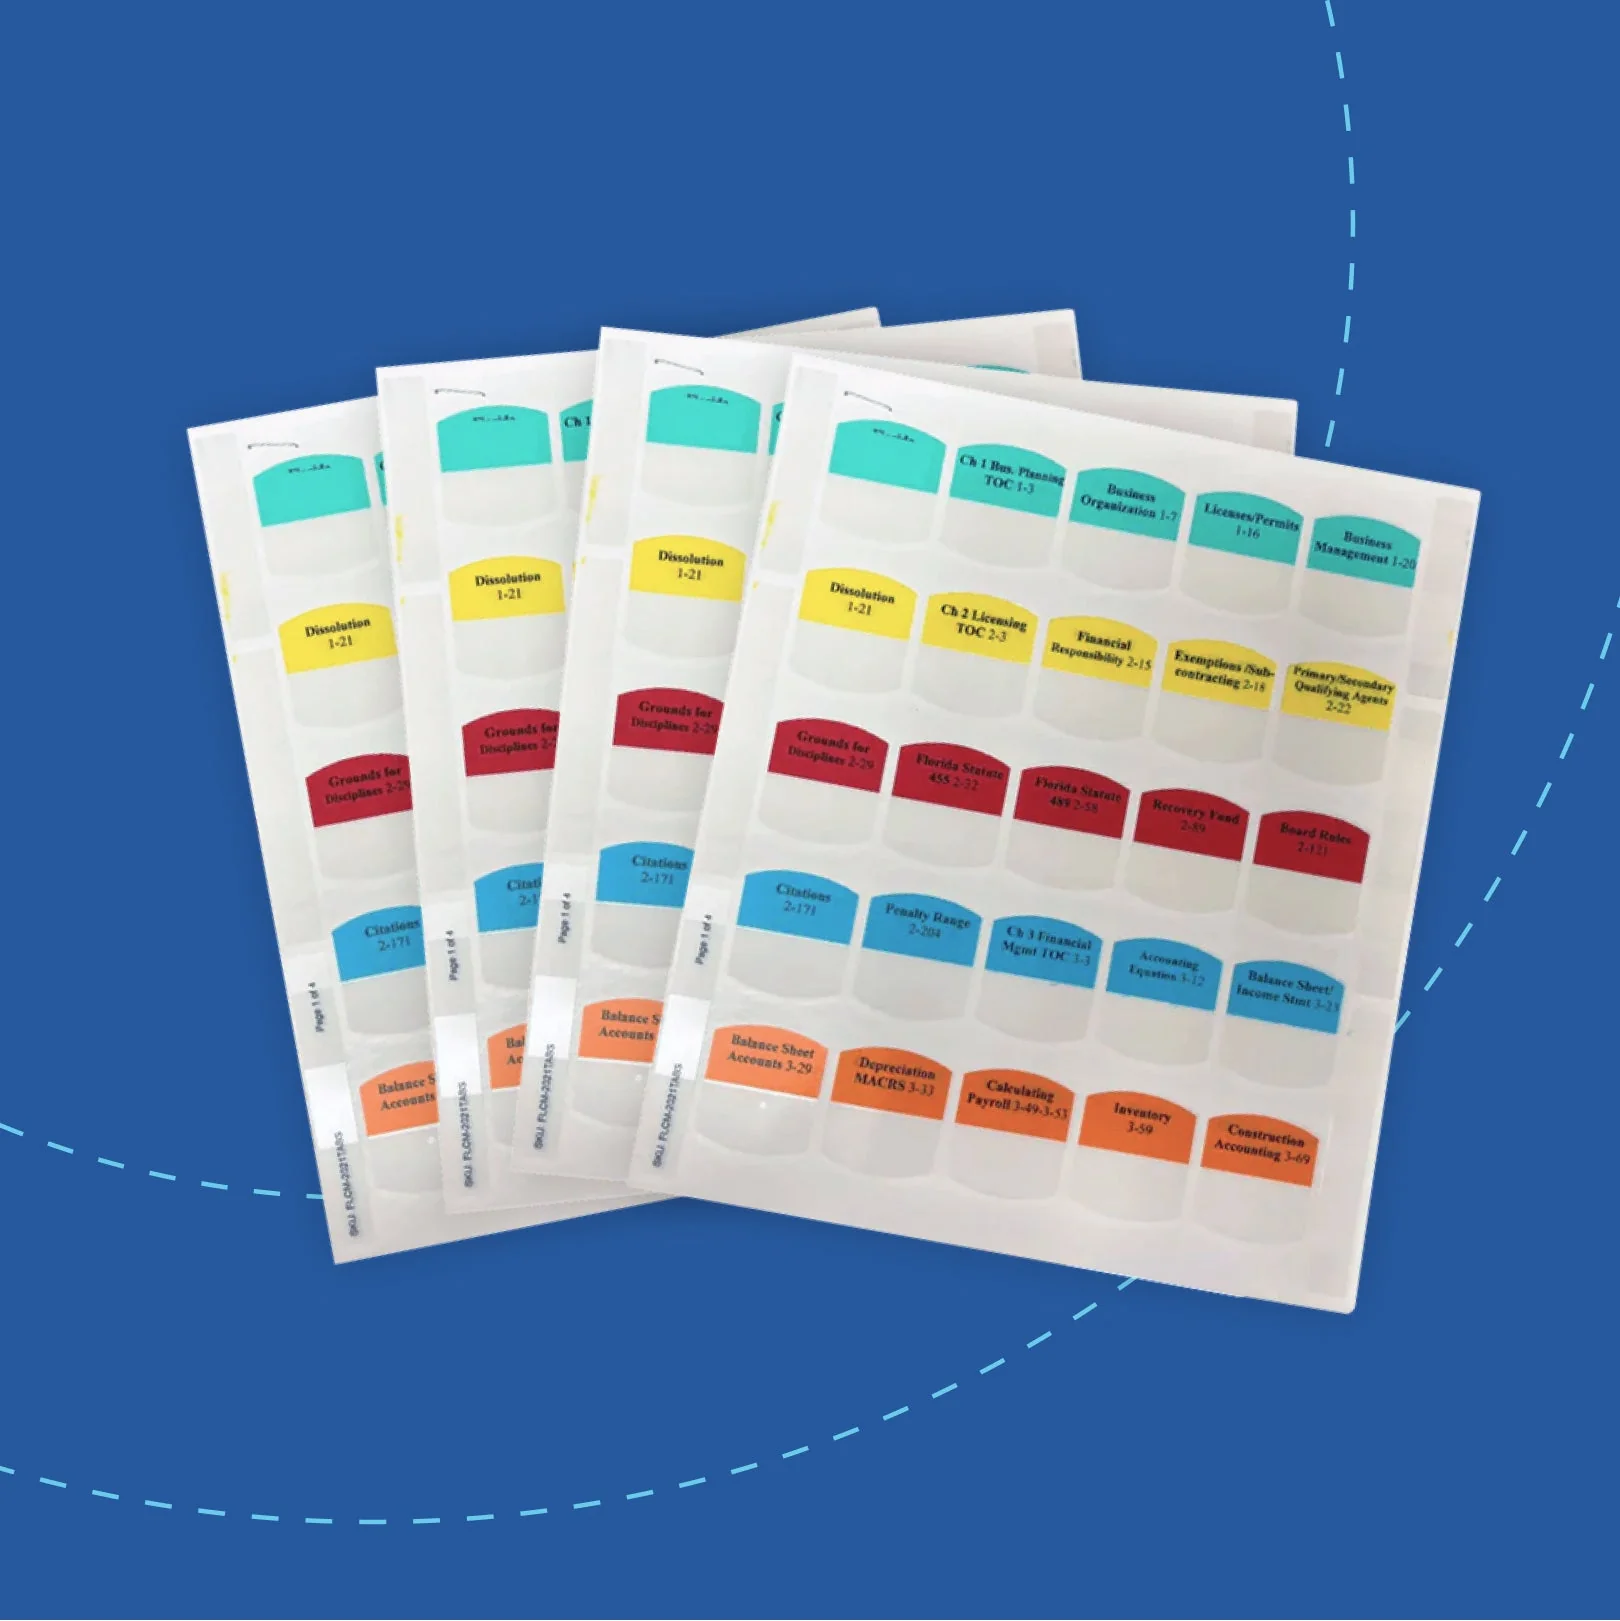 Are the tabs for the Florida Contractors Manual, 2021 edition in color?